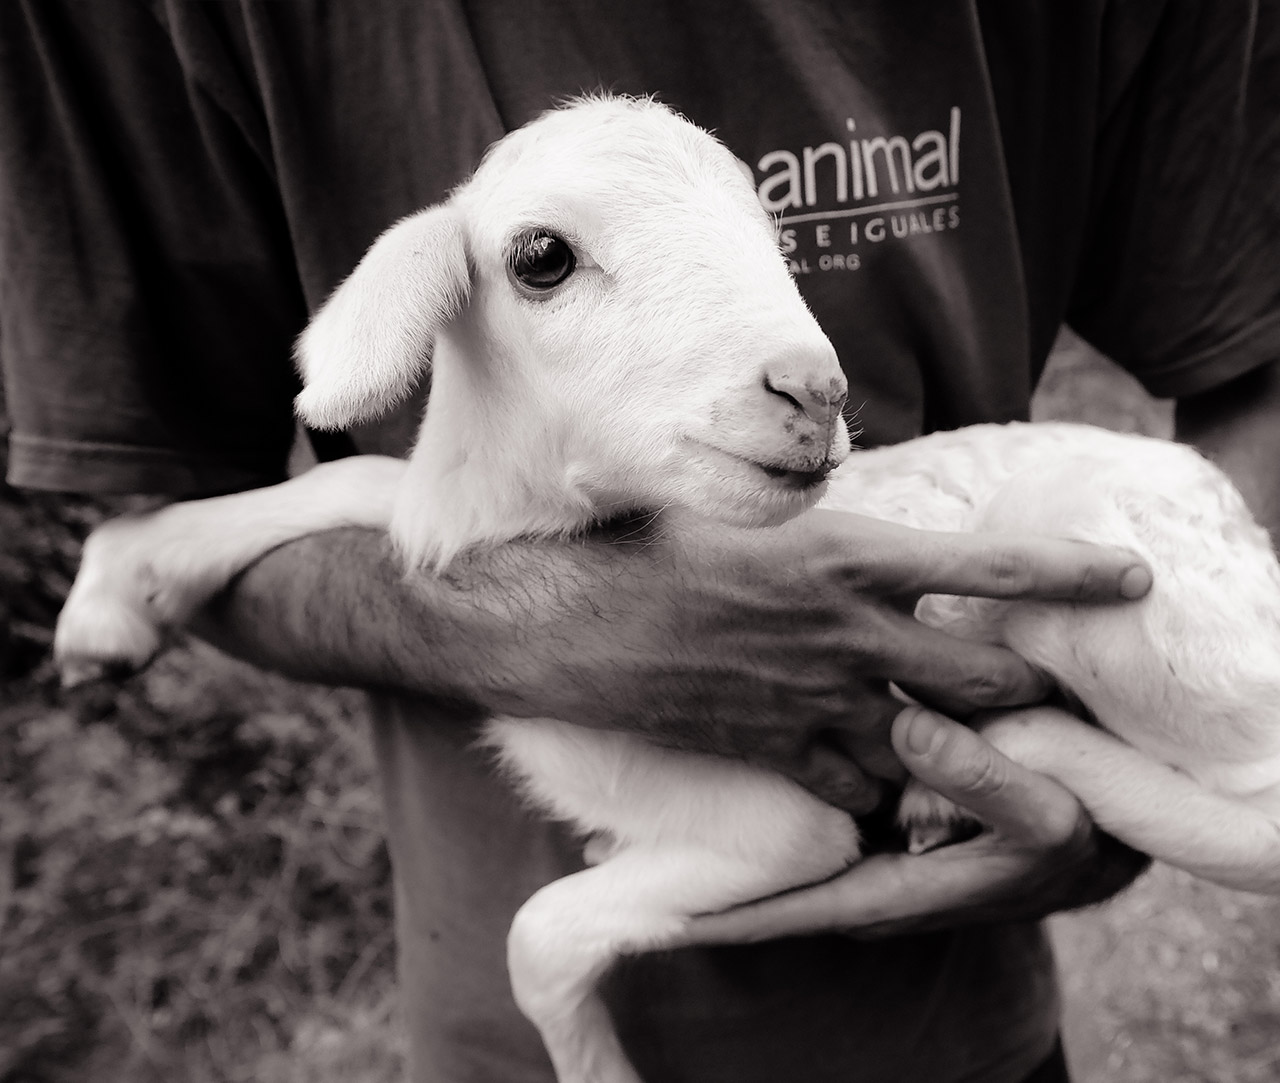 Rescued lamb on hands of Animal Equality volunteer